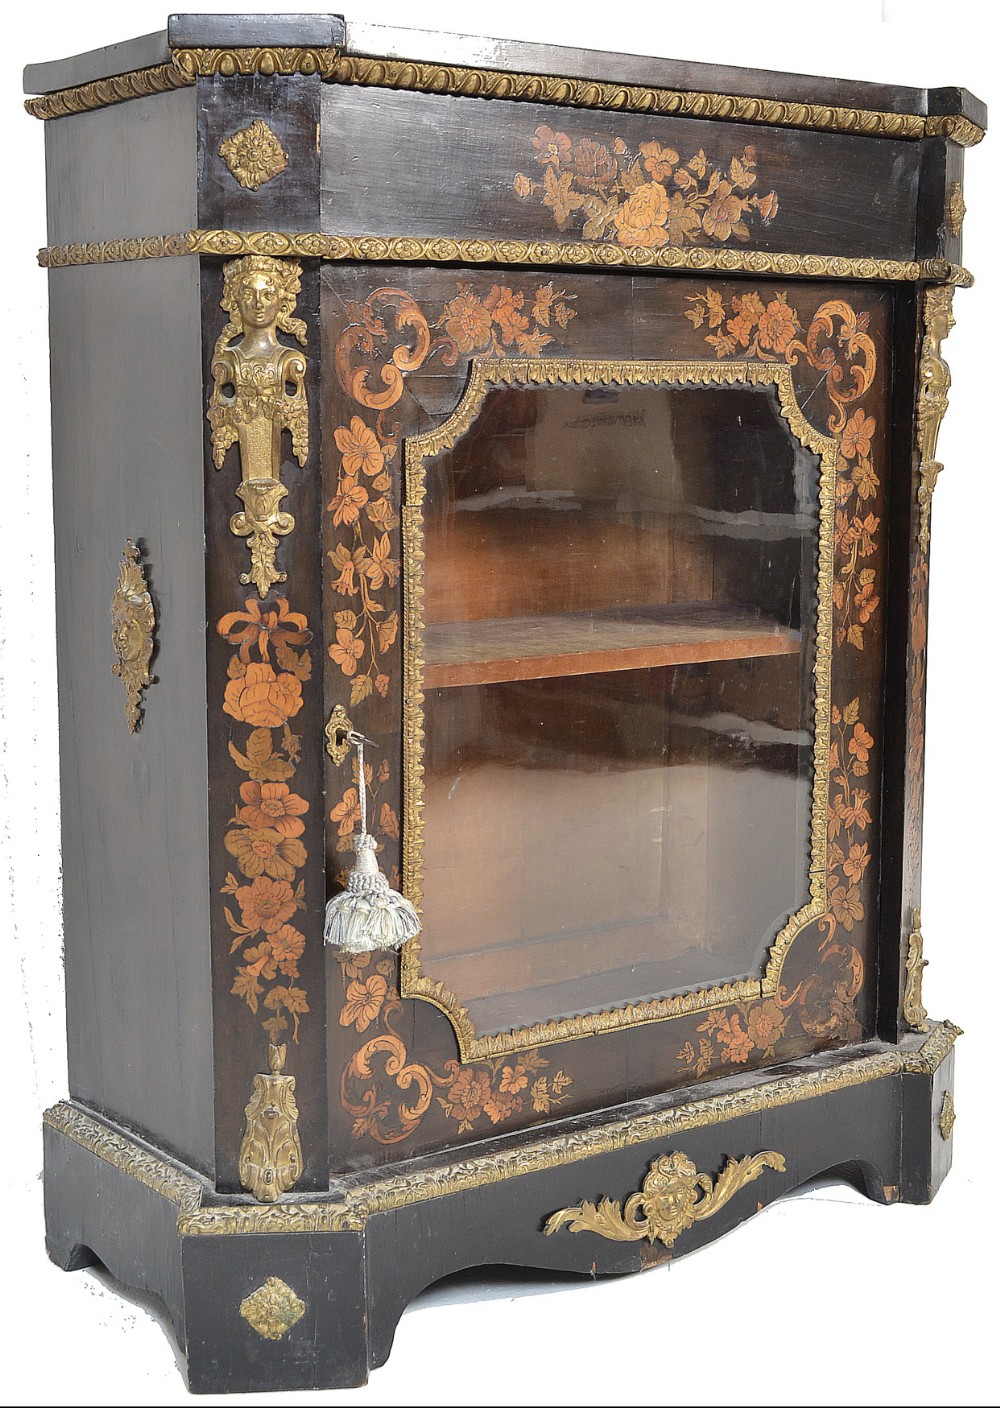 c19th inlaid ormulo mounted pier cabinet